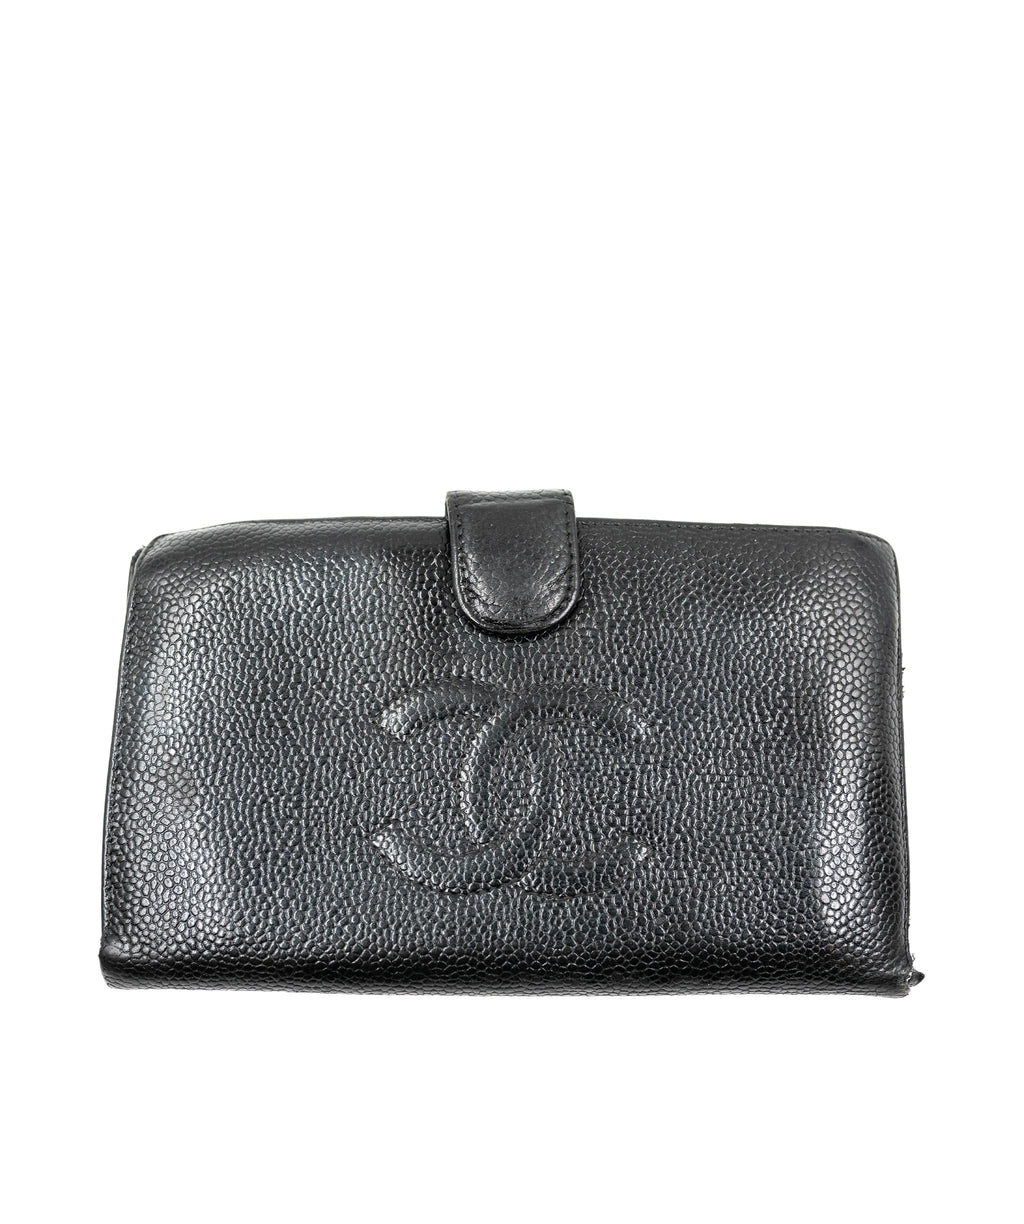 CHANEL  Bags  Steal Pricechanel Compact Trifold Wallet Black Caviar  Leather Cc  Poshmark